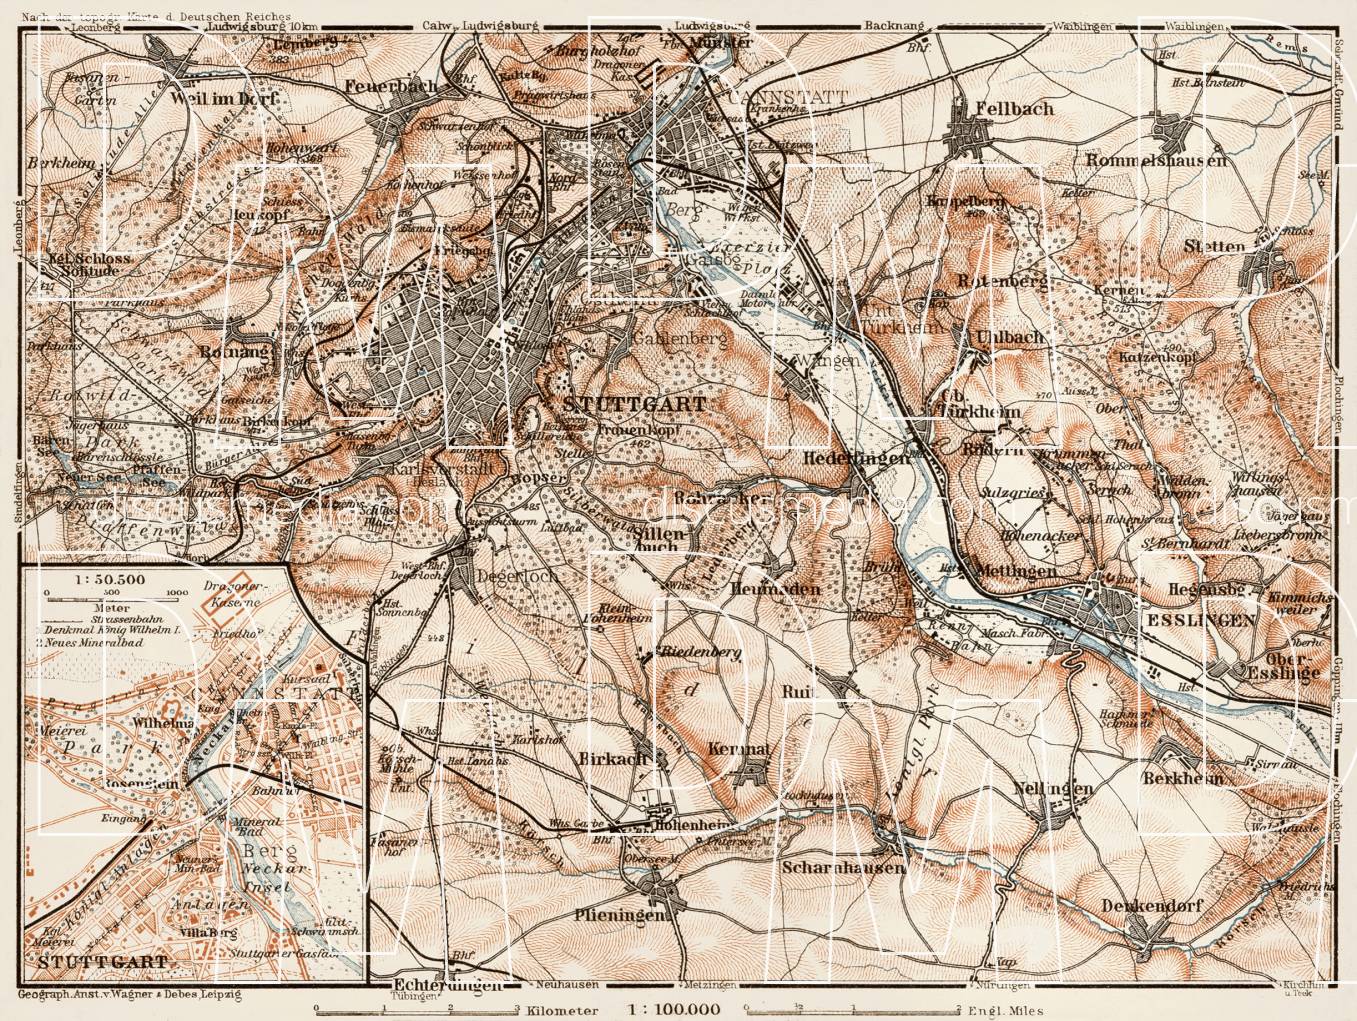 Old map of Stuttgart vicinity in 1909. Buy vintage map replica poster